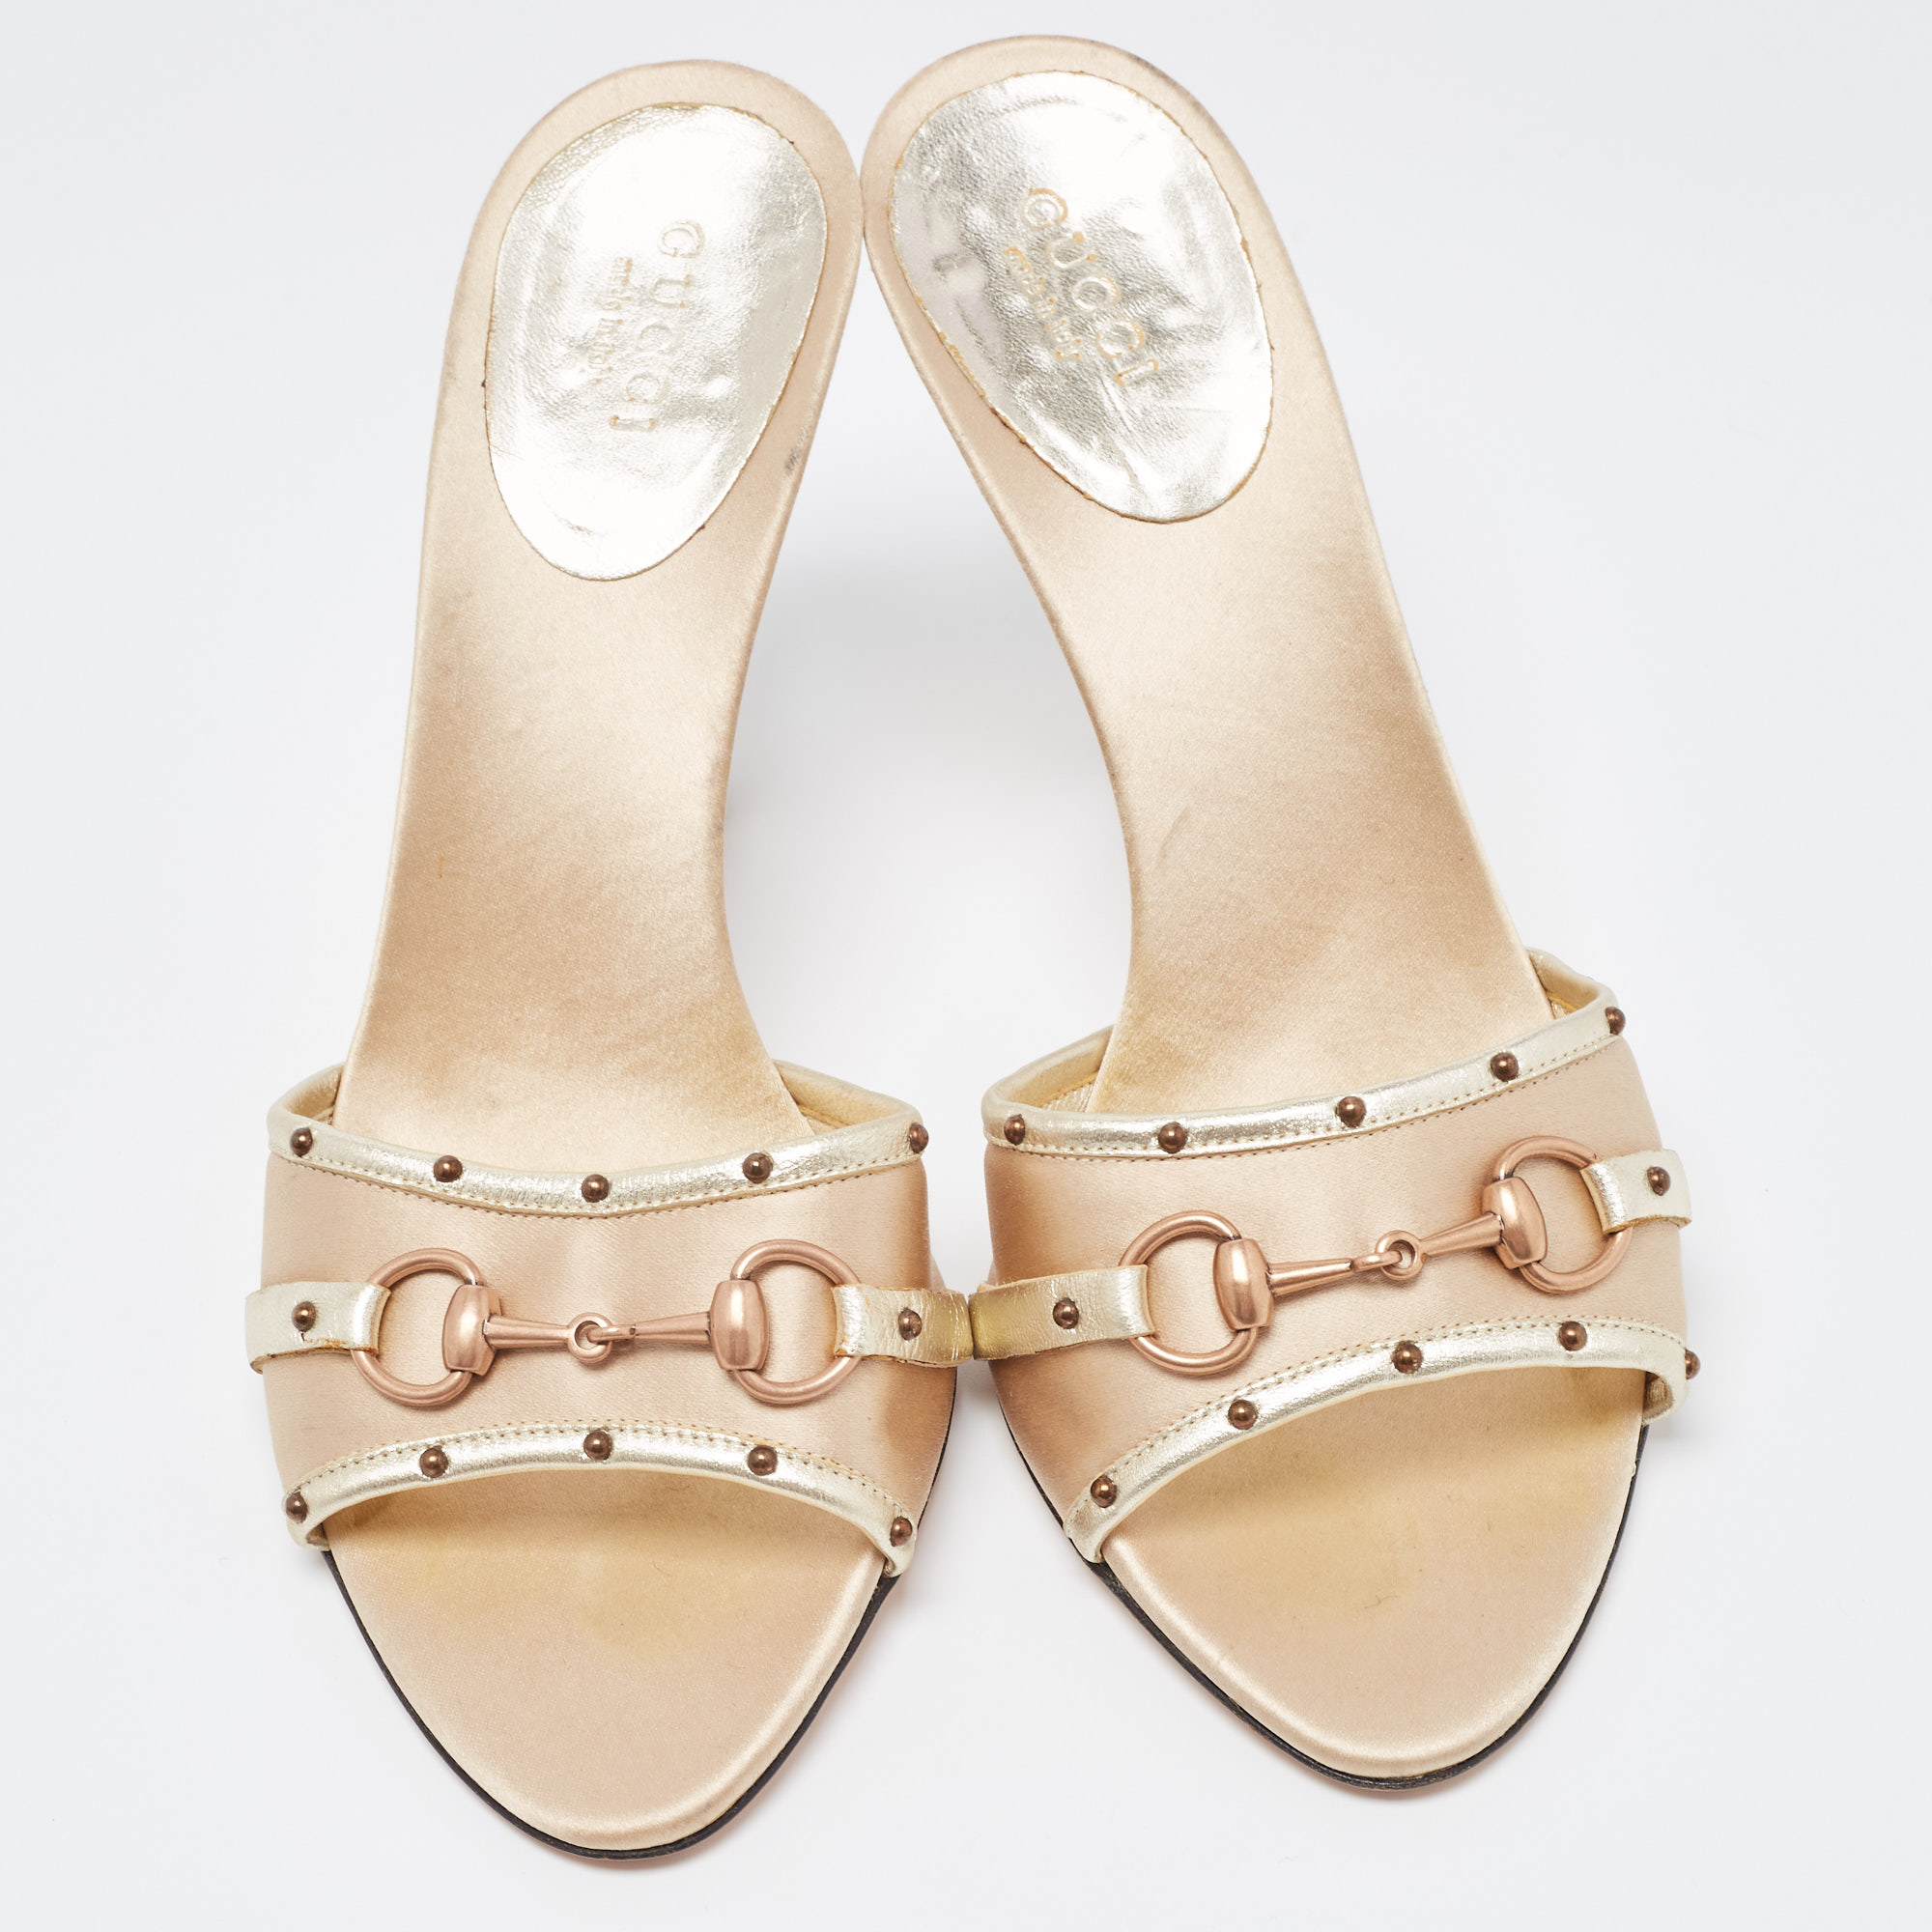 Gucci Gold Satin And Studded Leather Horsebit Slide Sandals Size 37